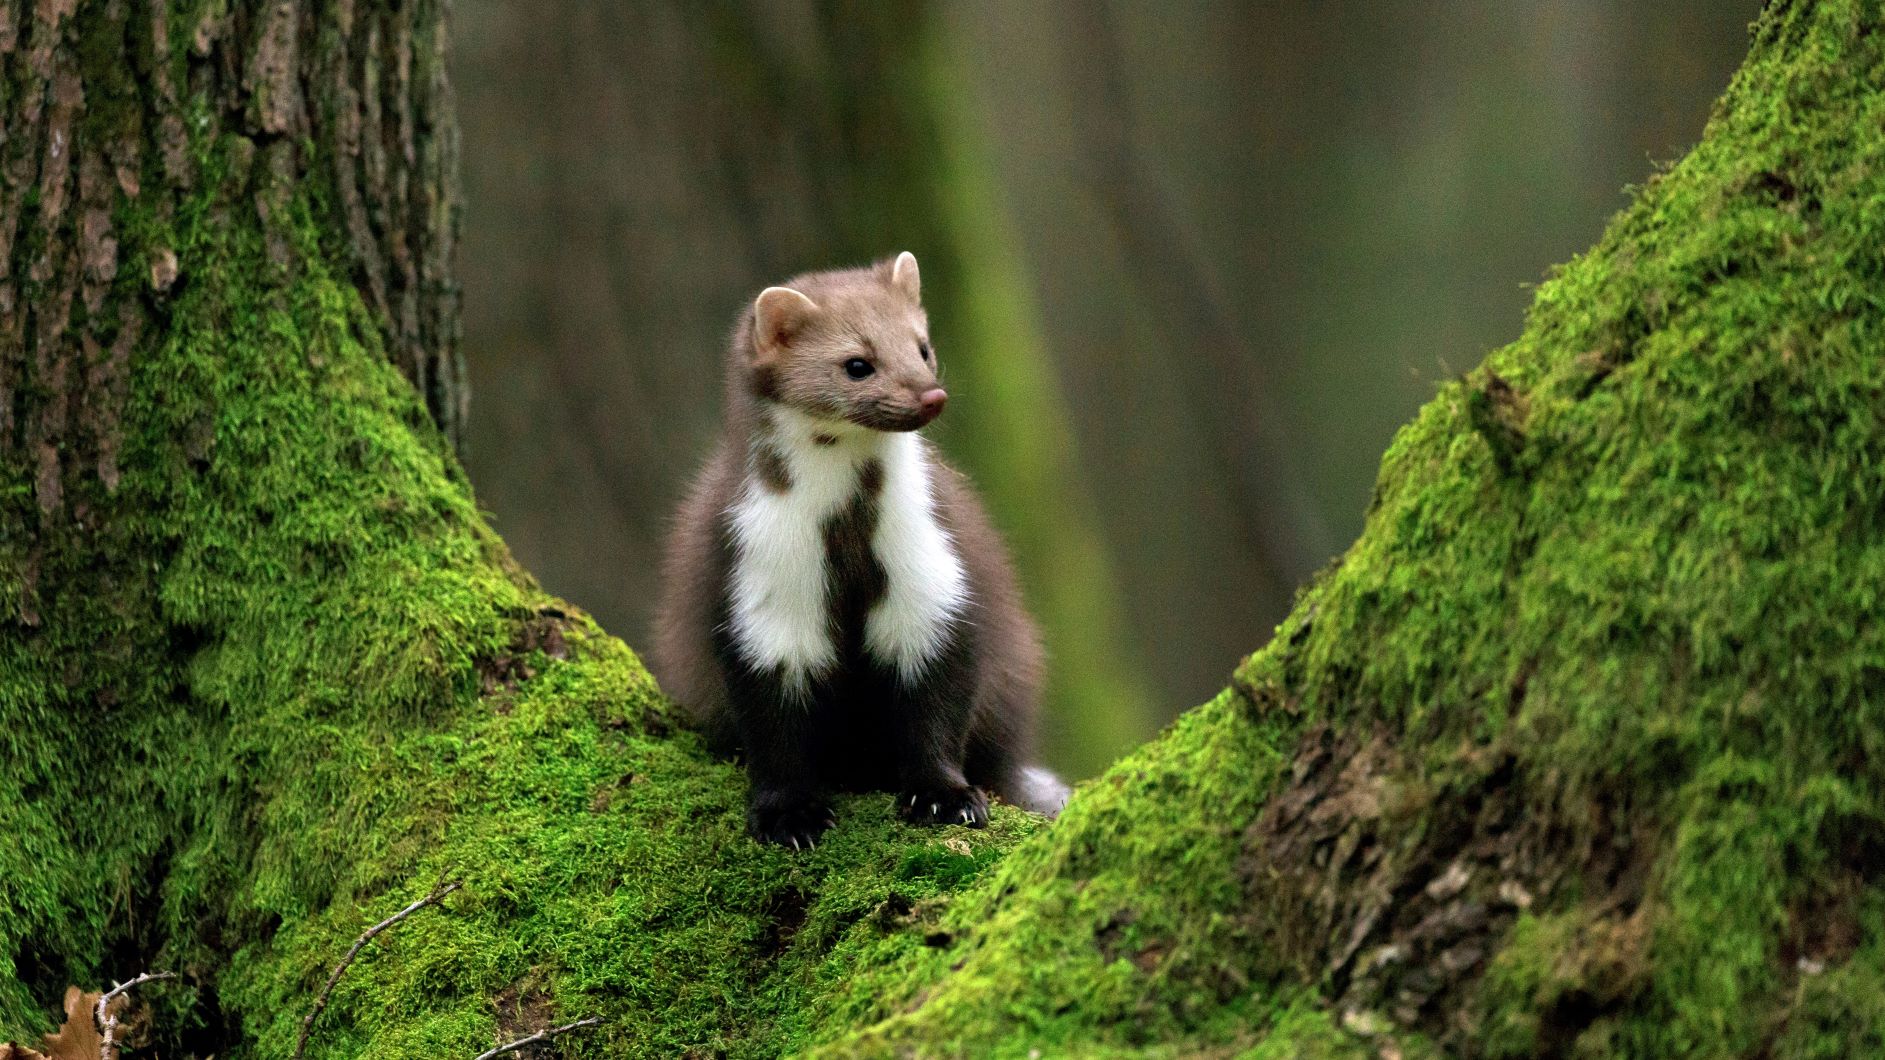 A brown pine marten sitting on a mossy tree branch